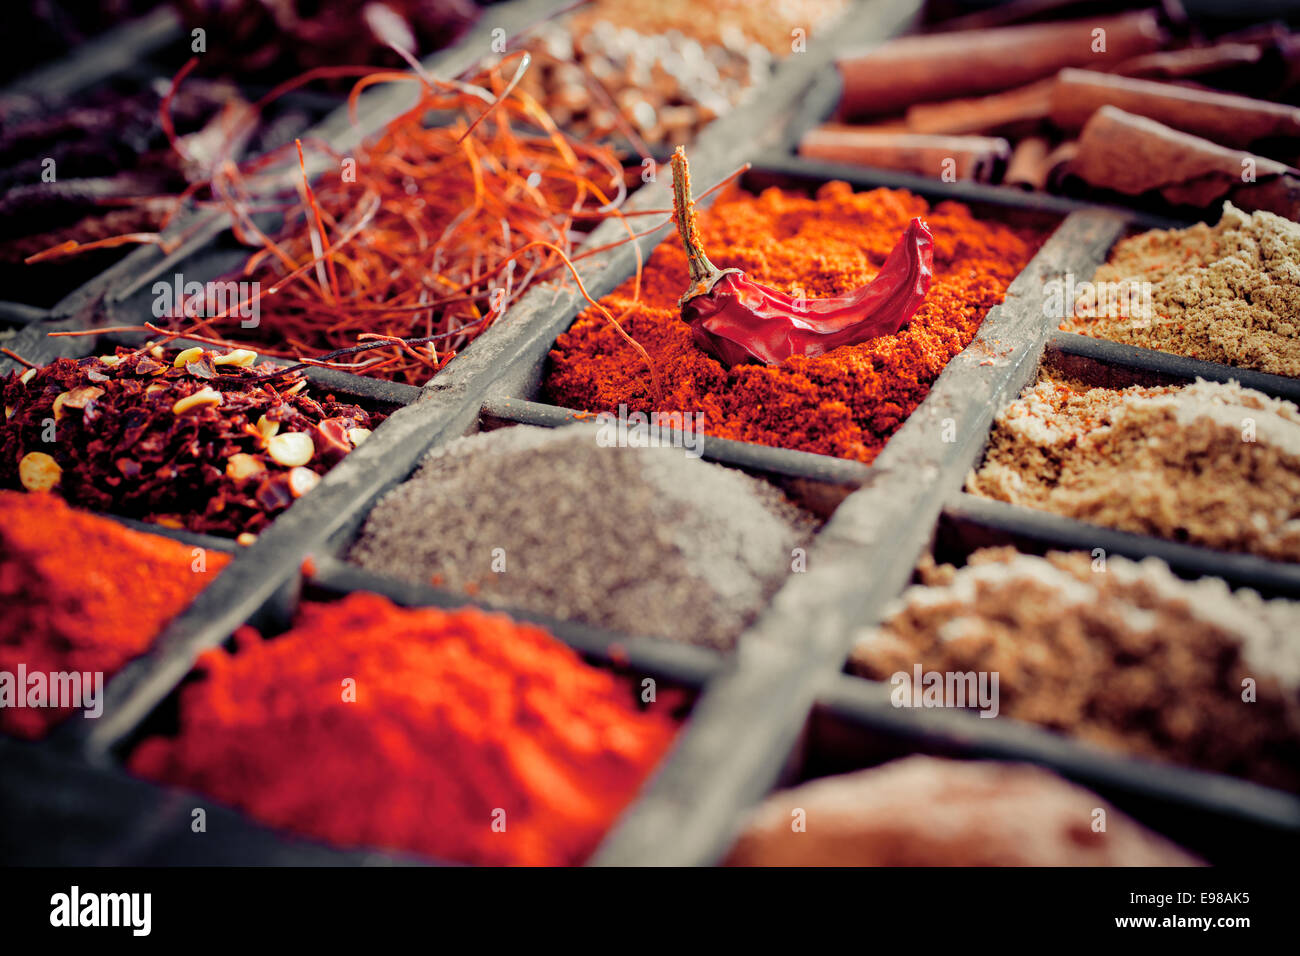 Close-up of different types of Assorted Spices in a wooden box. Stock Photo